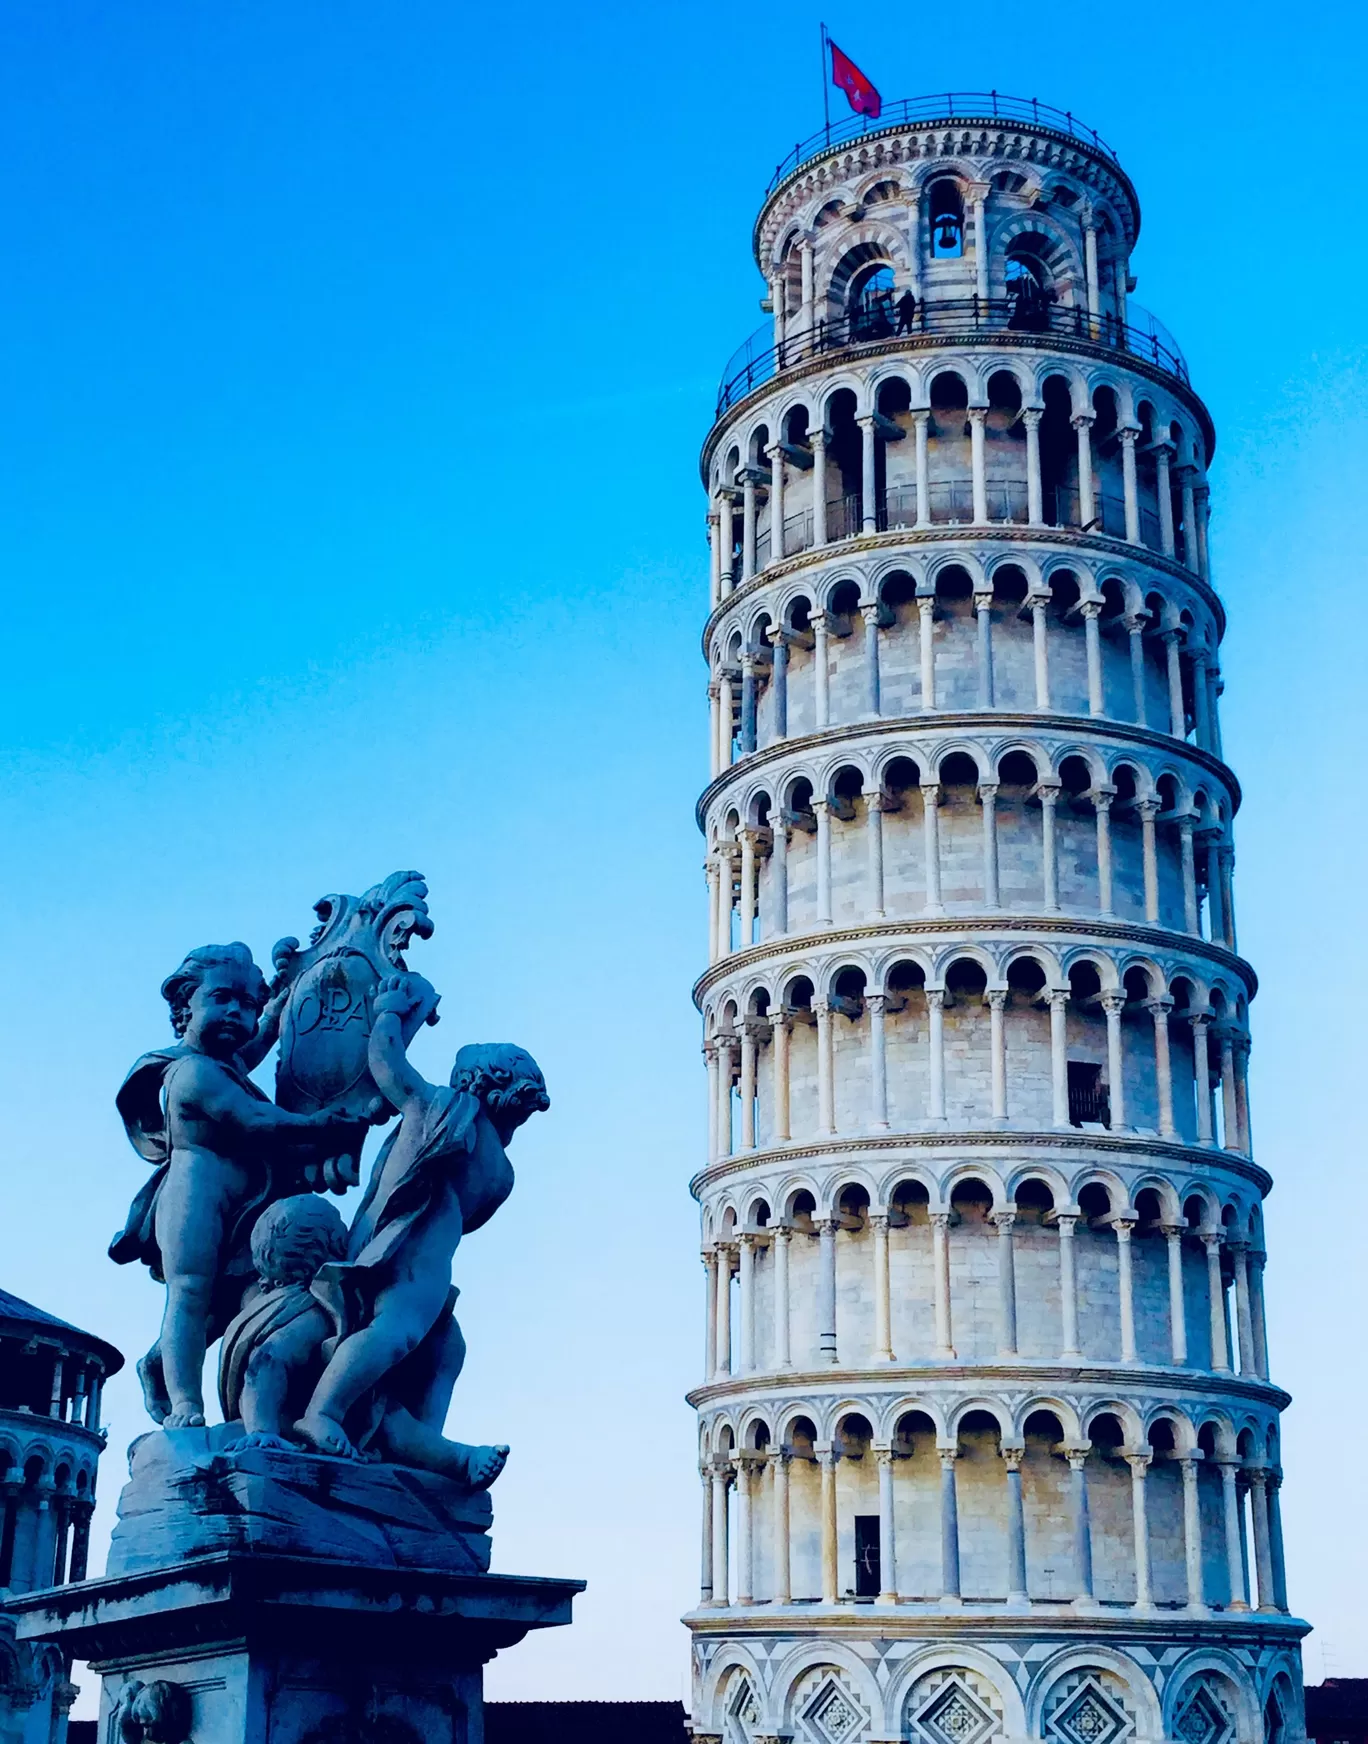 Photo of Leaning Tower of Pisa By Raveendra Mrkc